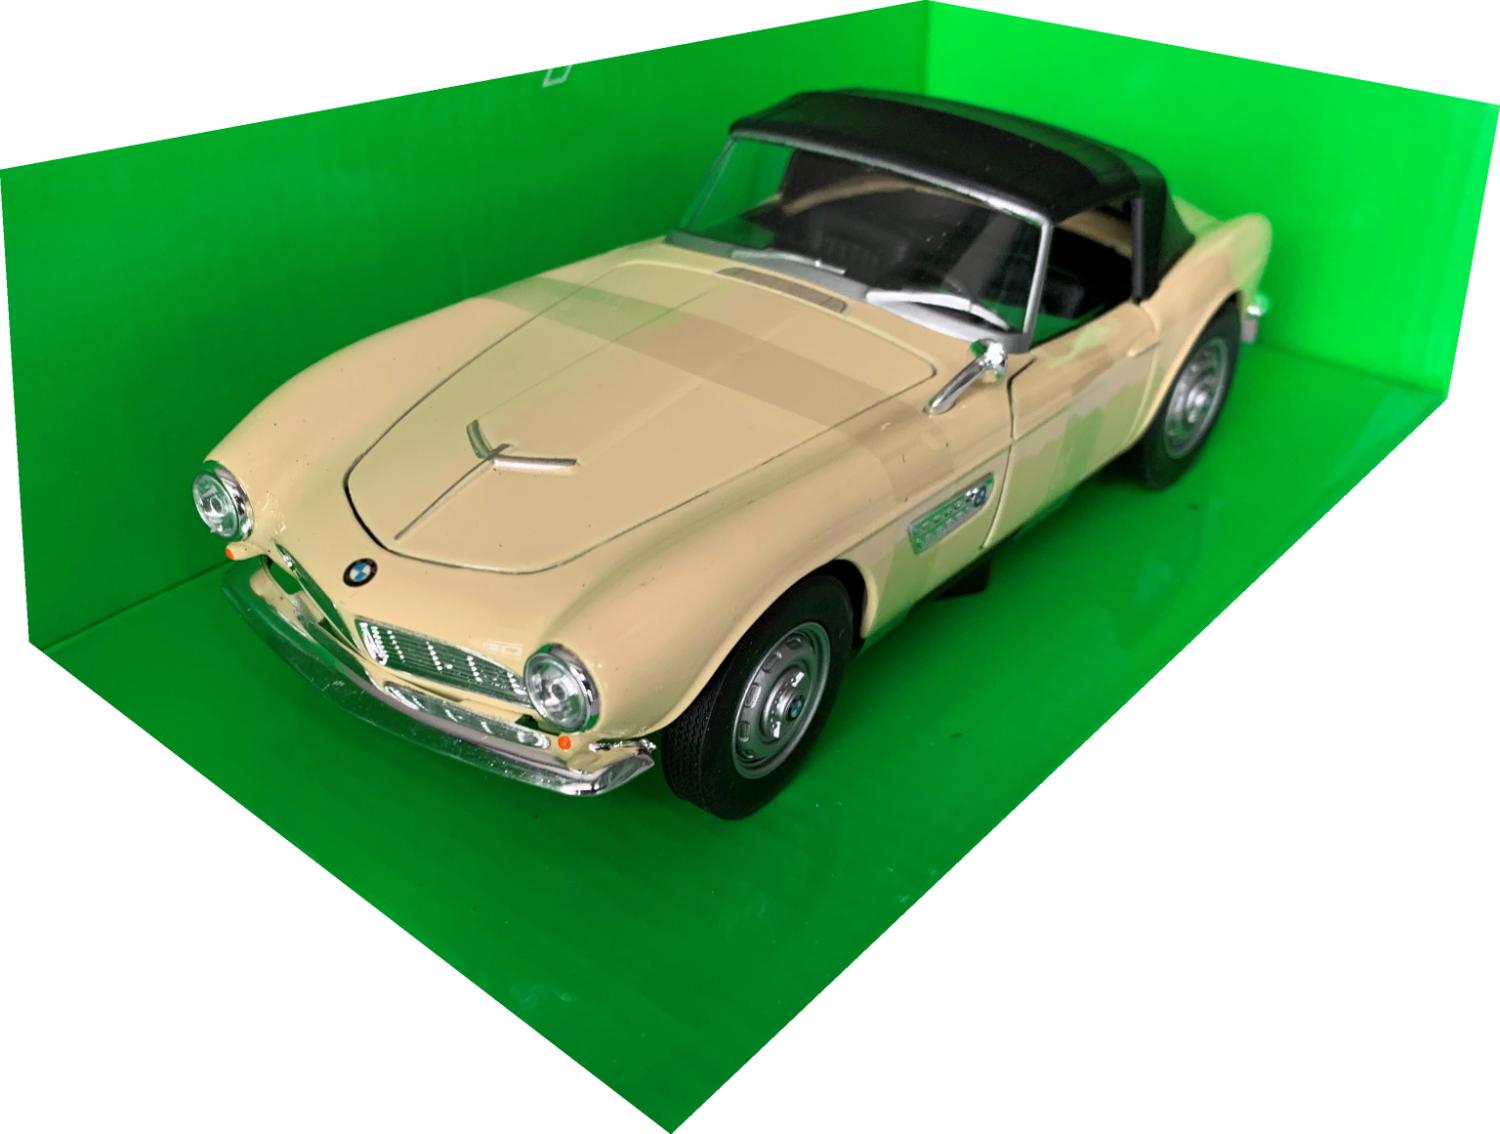 An excellent reproduction of the BMW 507 with high level of detail throughout, all authentically recreated. Model is presented in a window display box